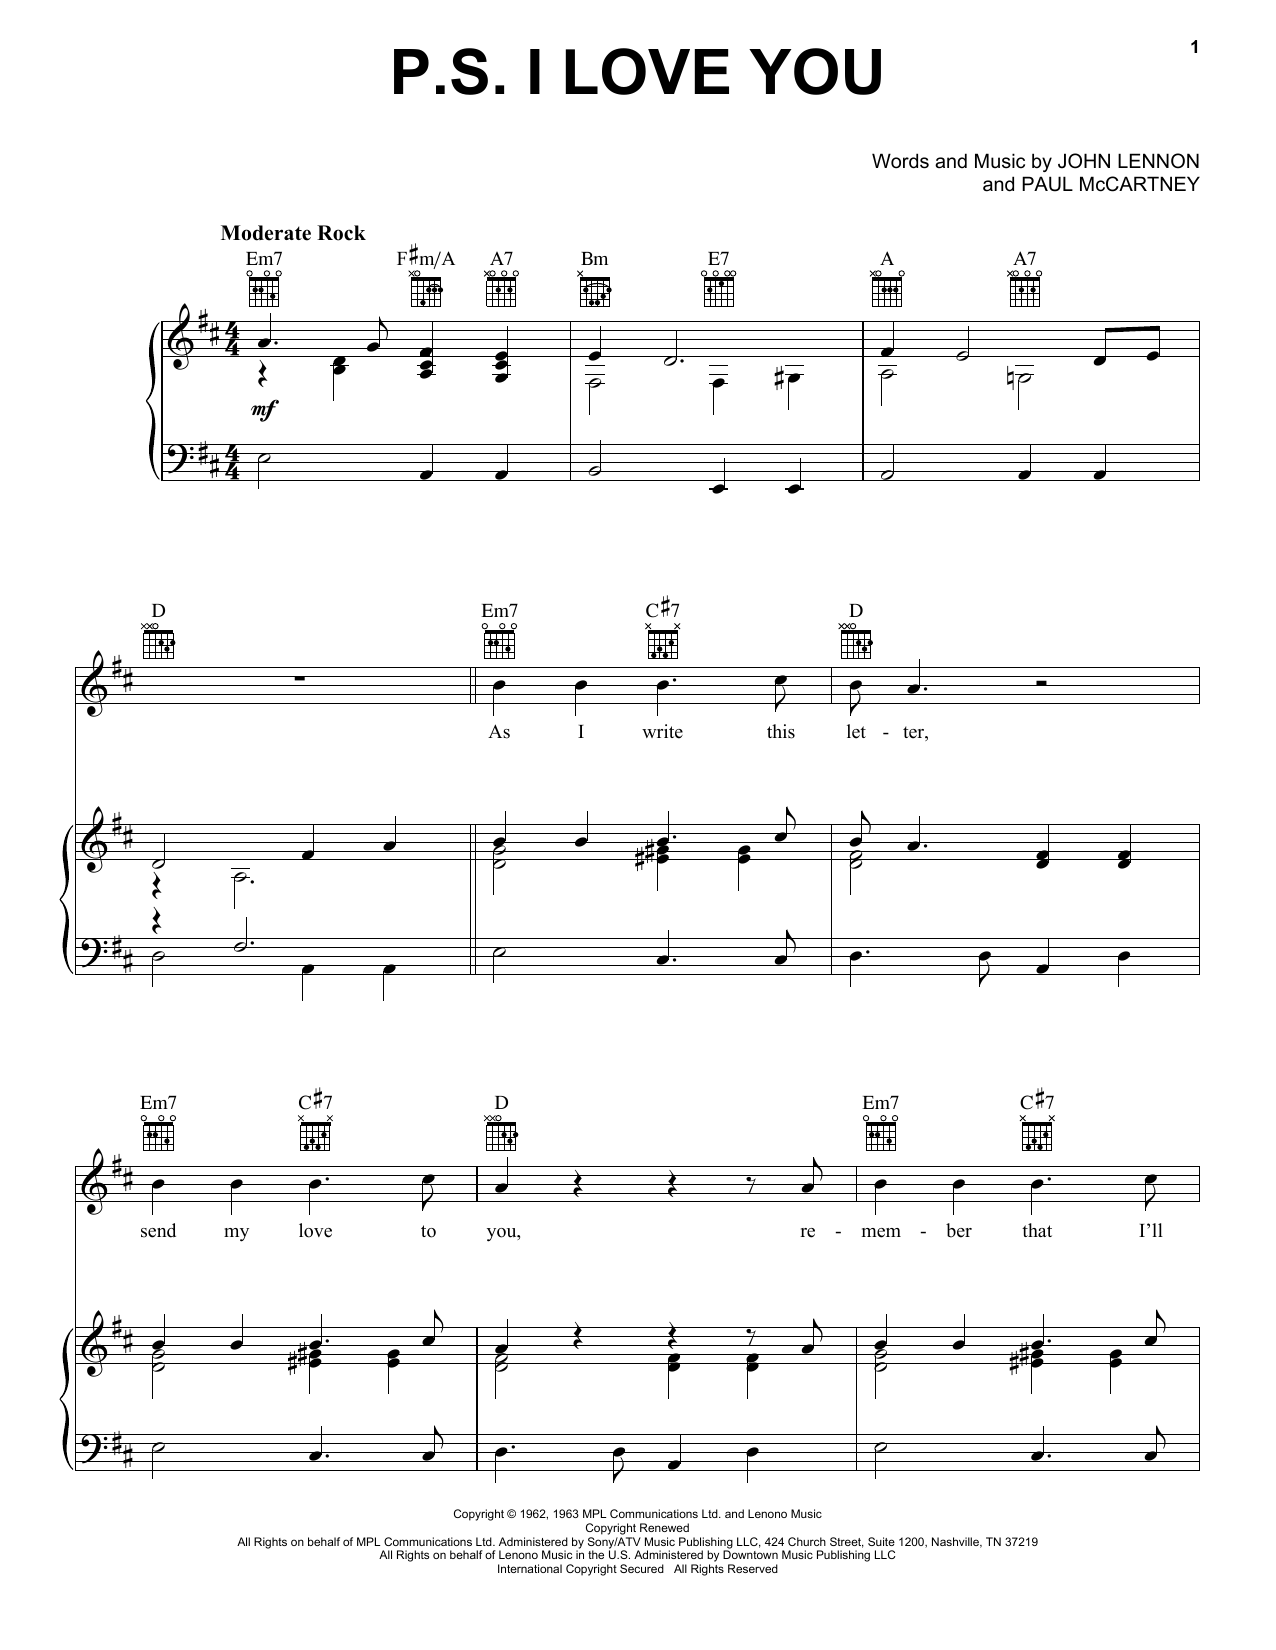 Download The Beatles P.S. I Love You Sheet Music